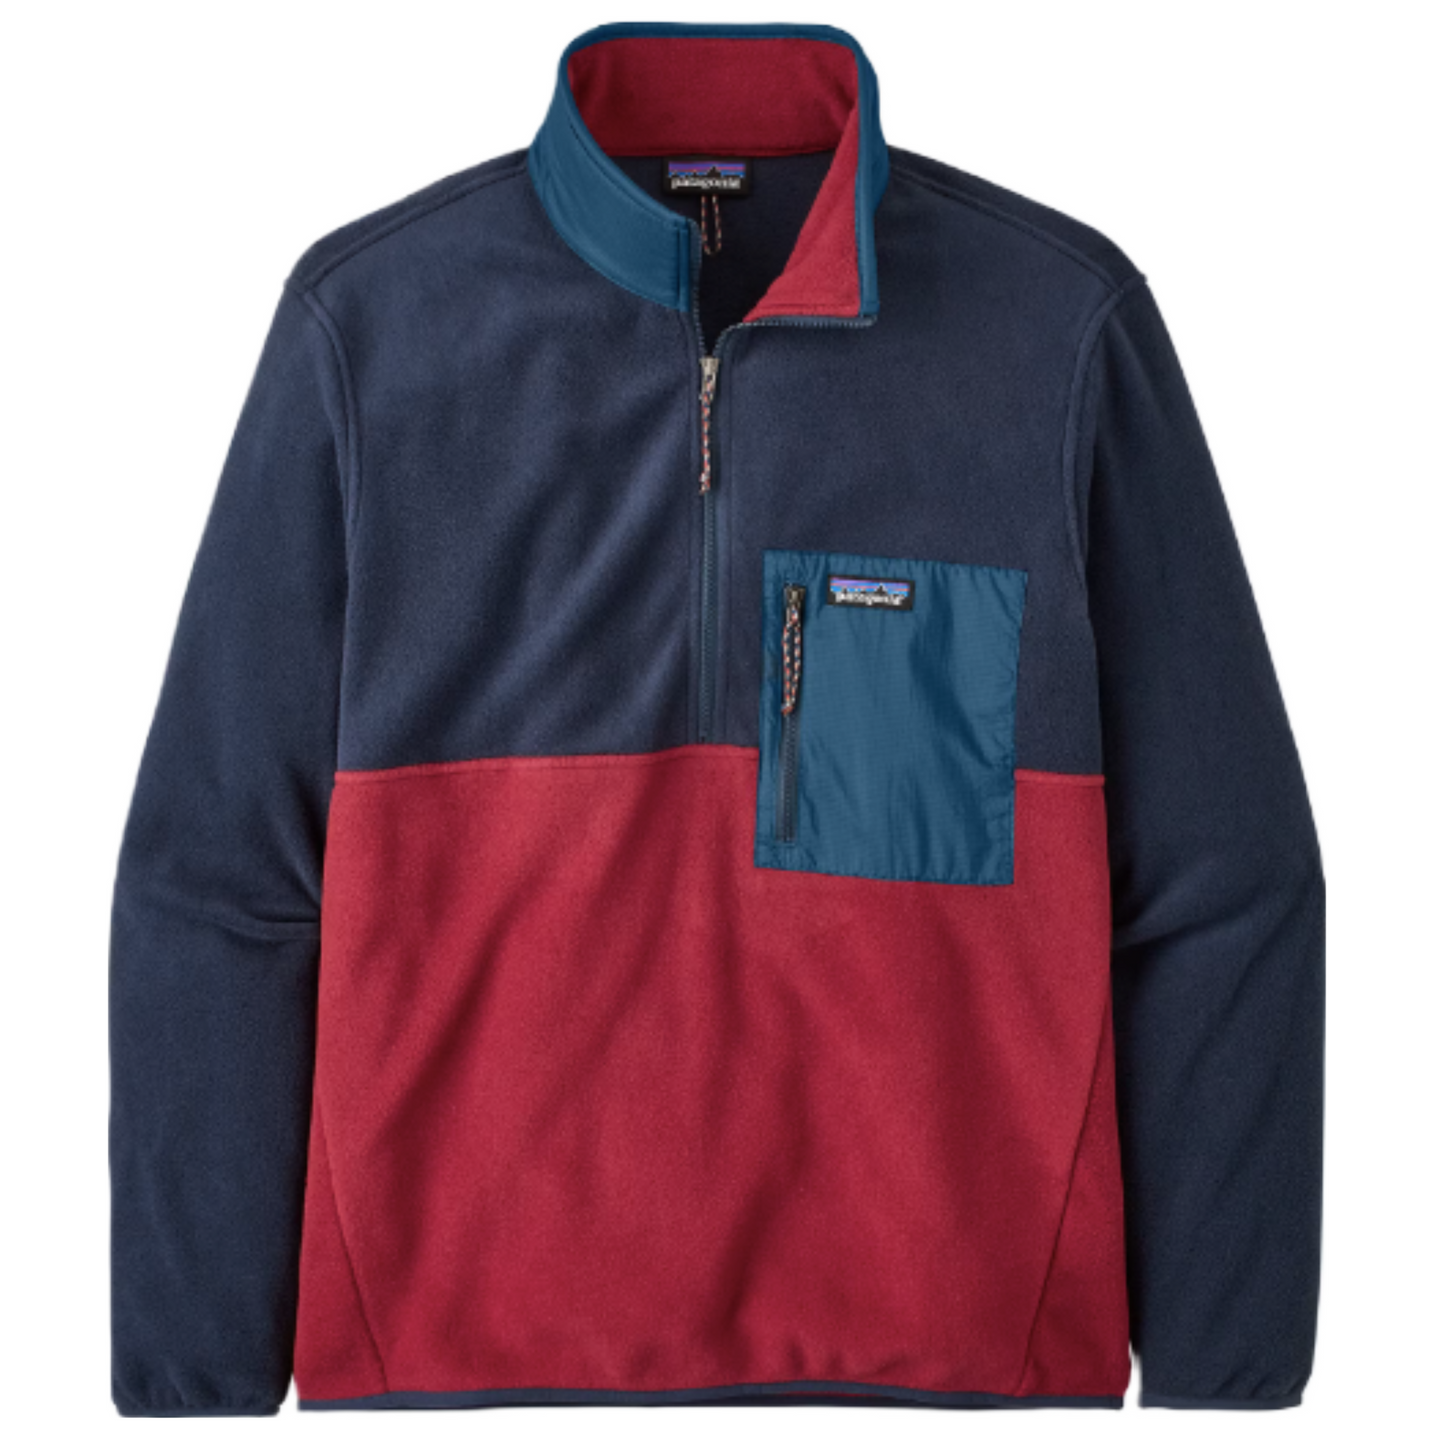 Patagonia Men's Microdini 1/2 Zip Pullover in Wax Red